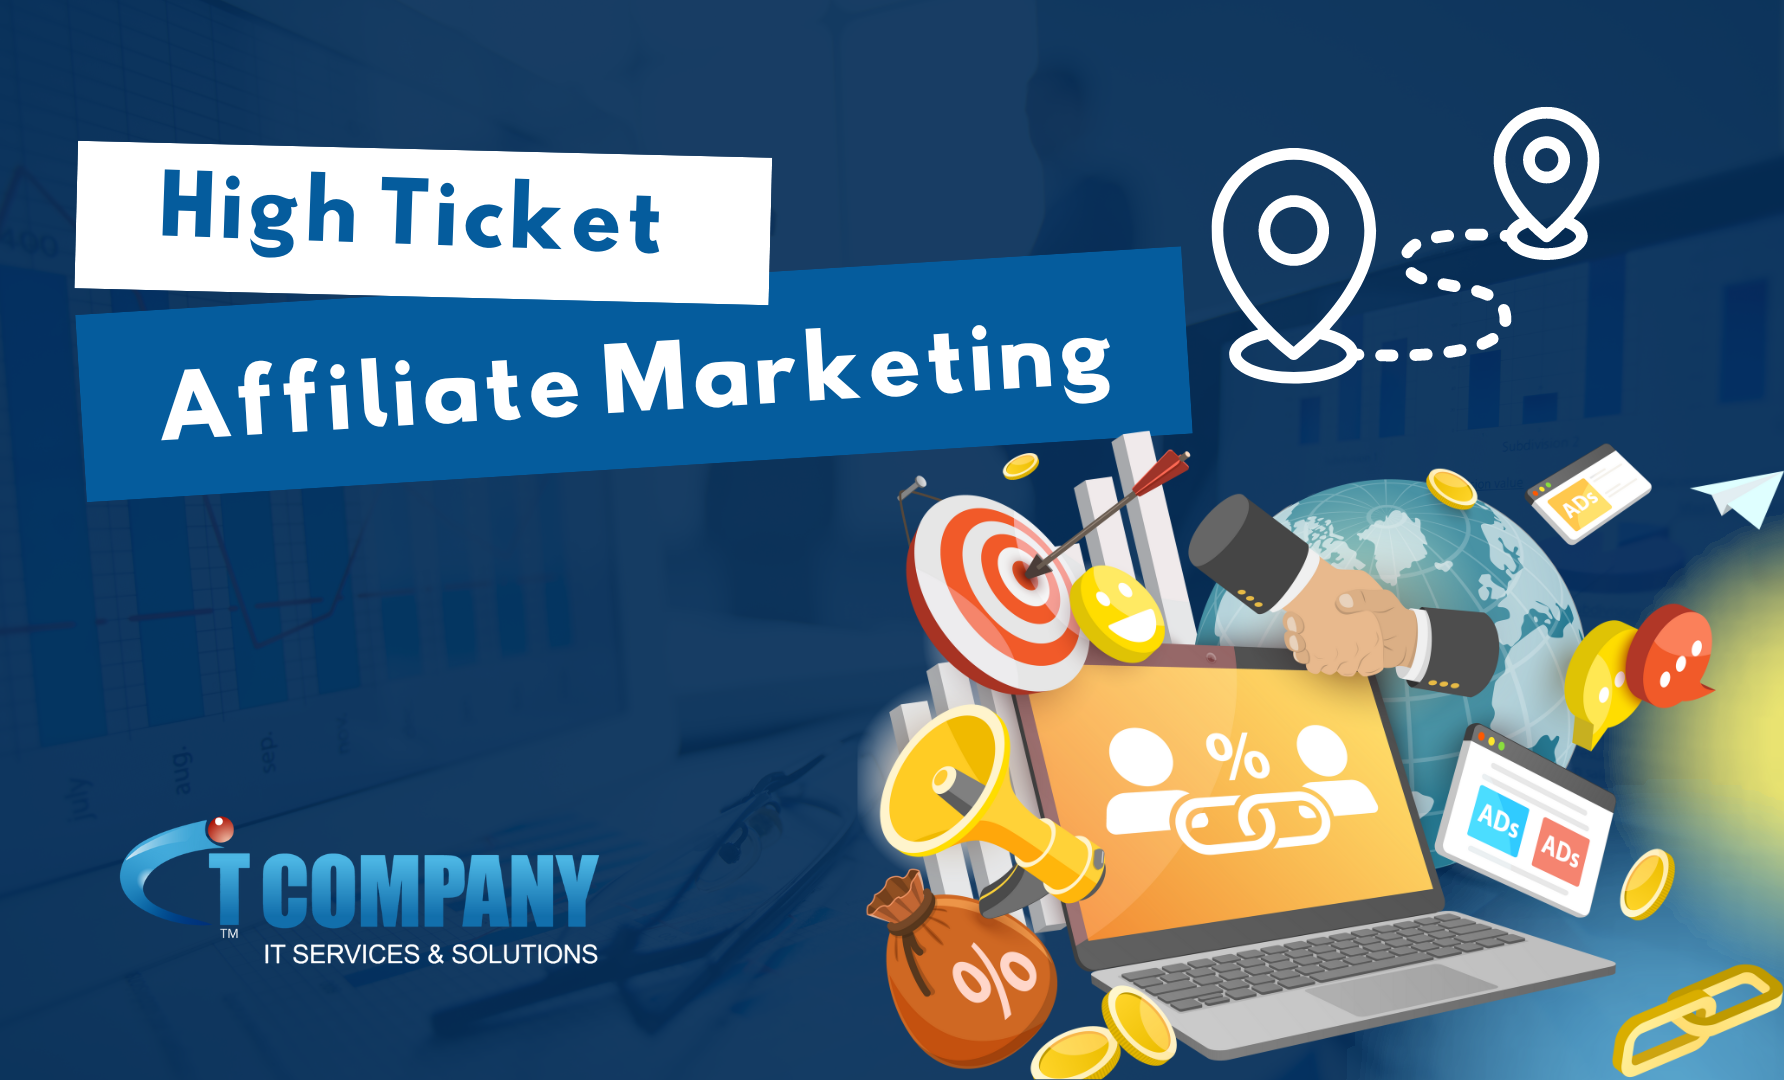 The best Guide to High Ticket Affiliate Marketing in Australia